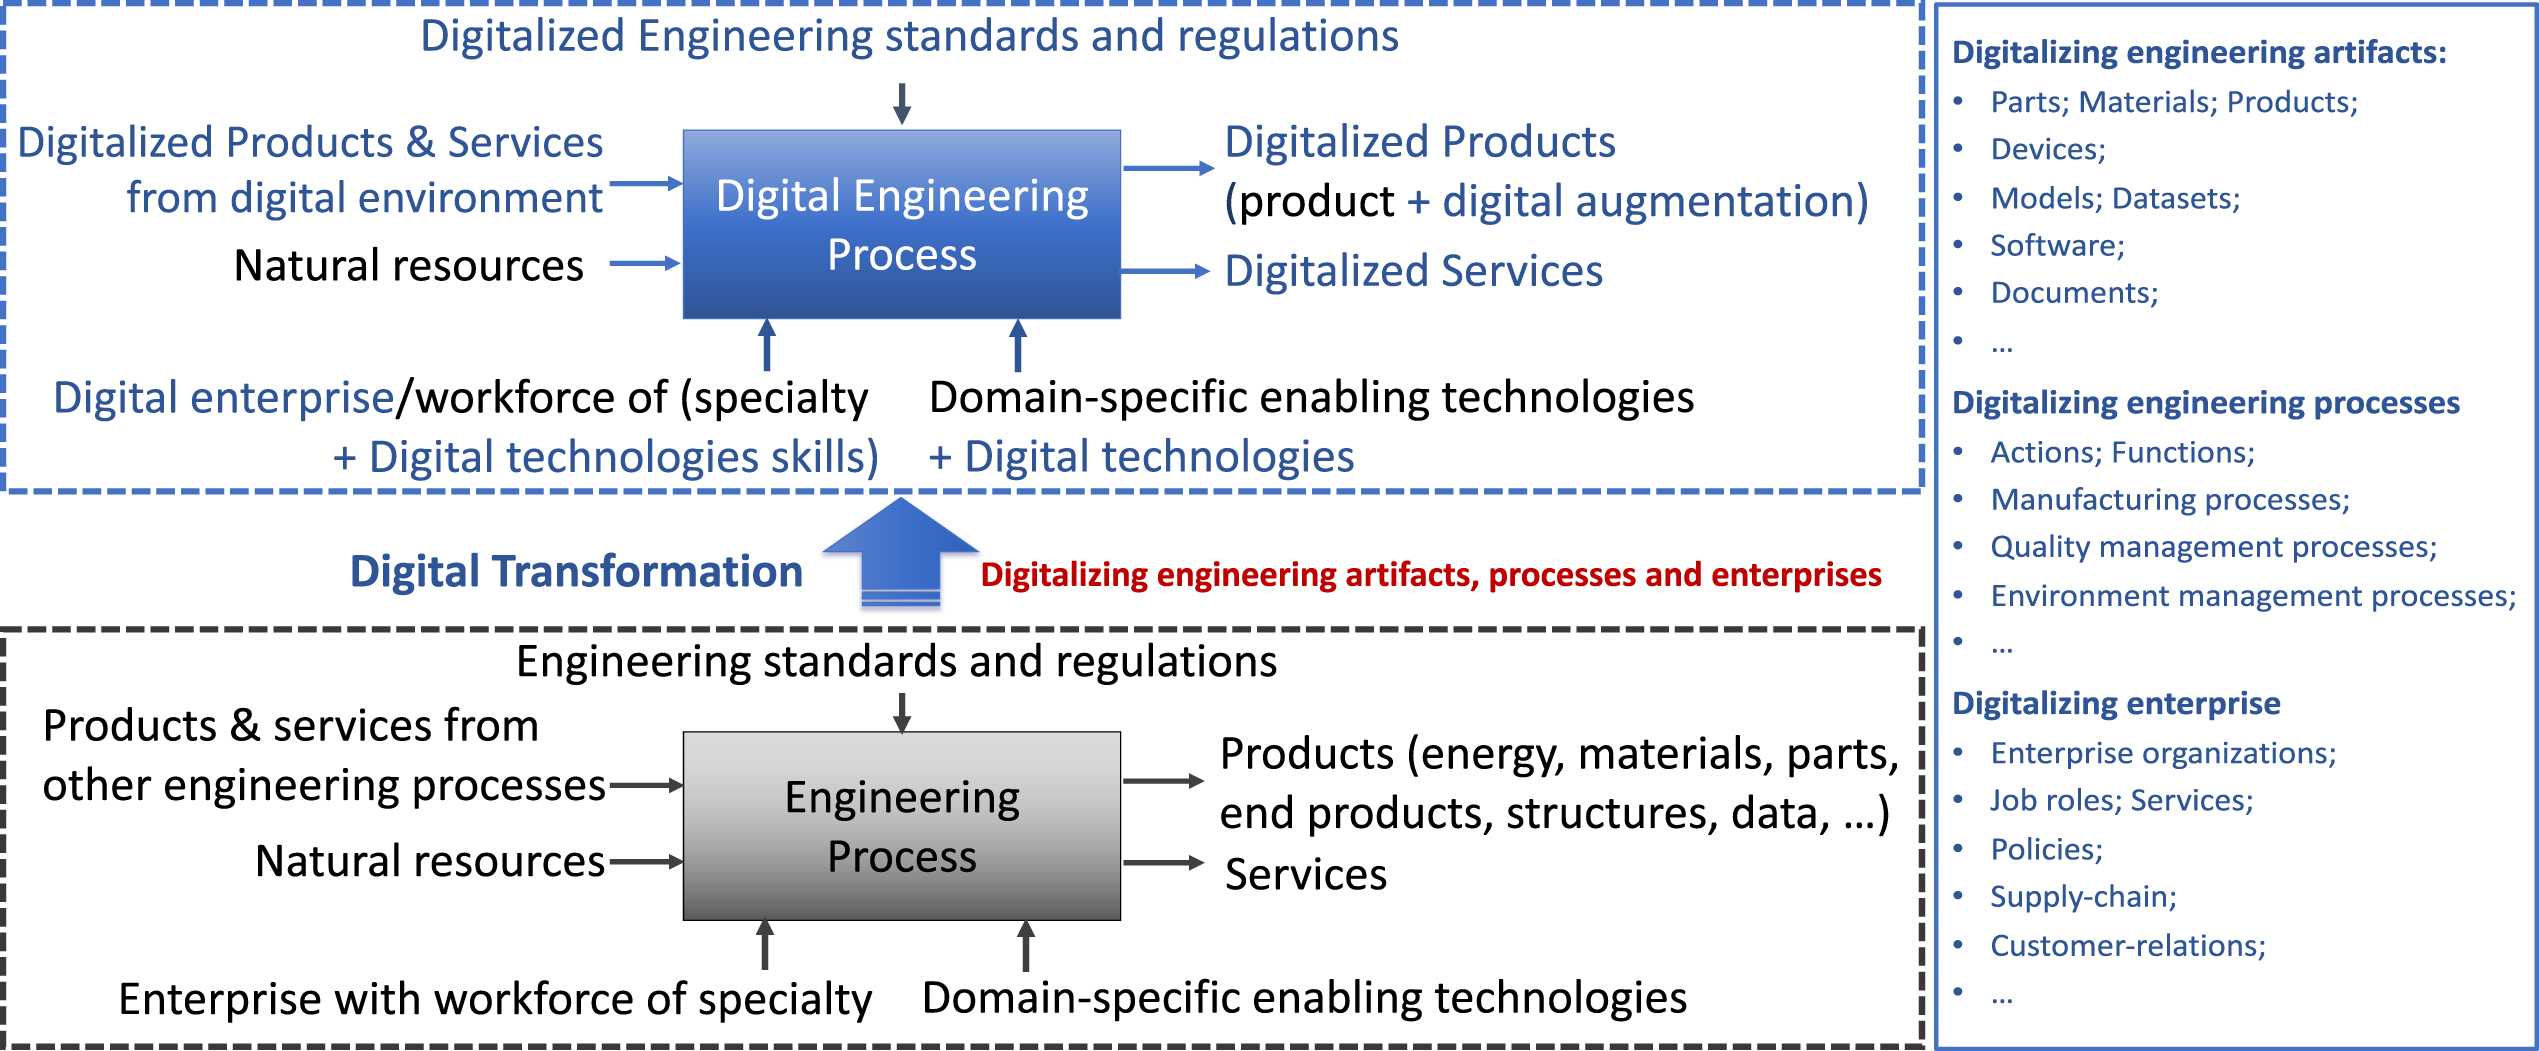 Digital engineering transformation from a process perspective.